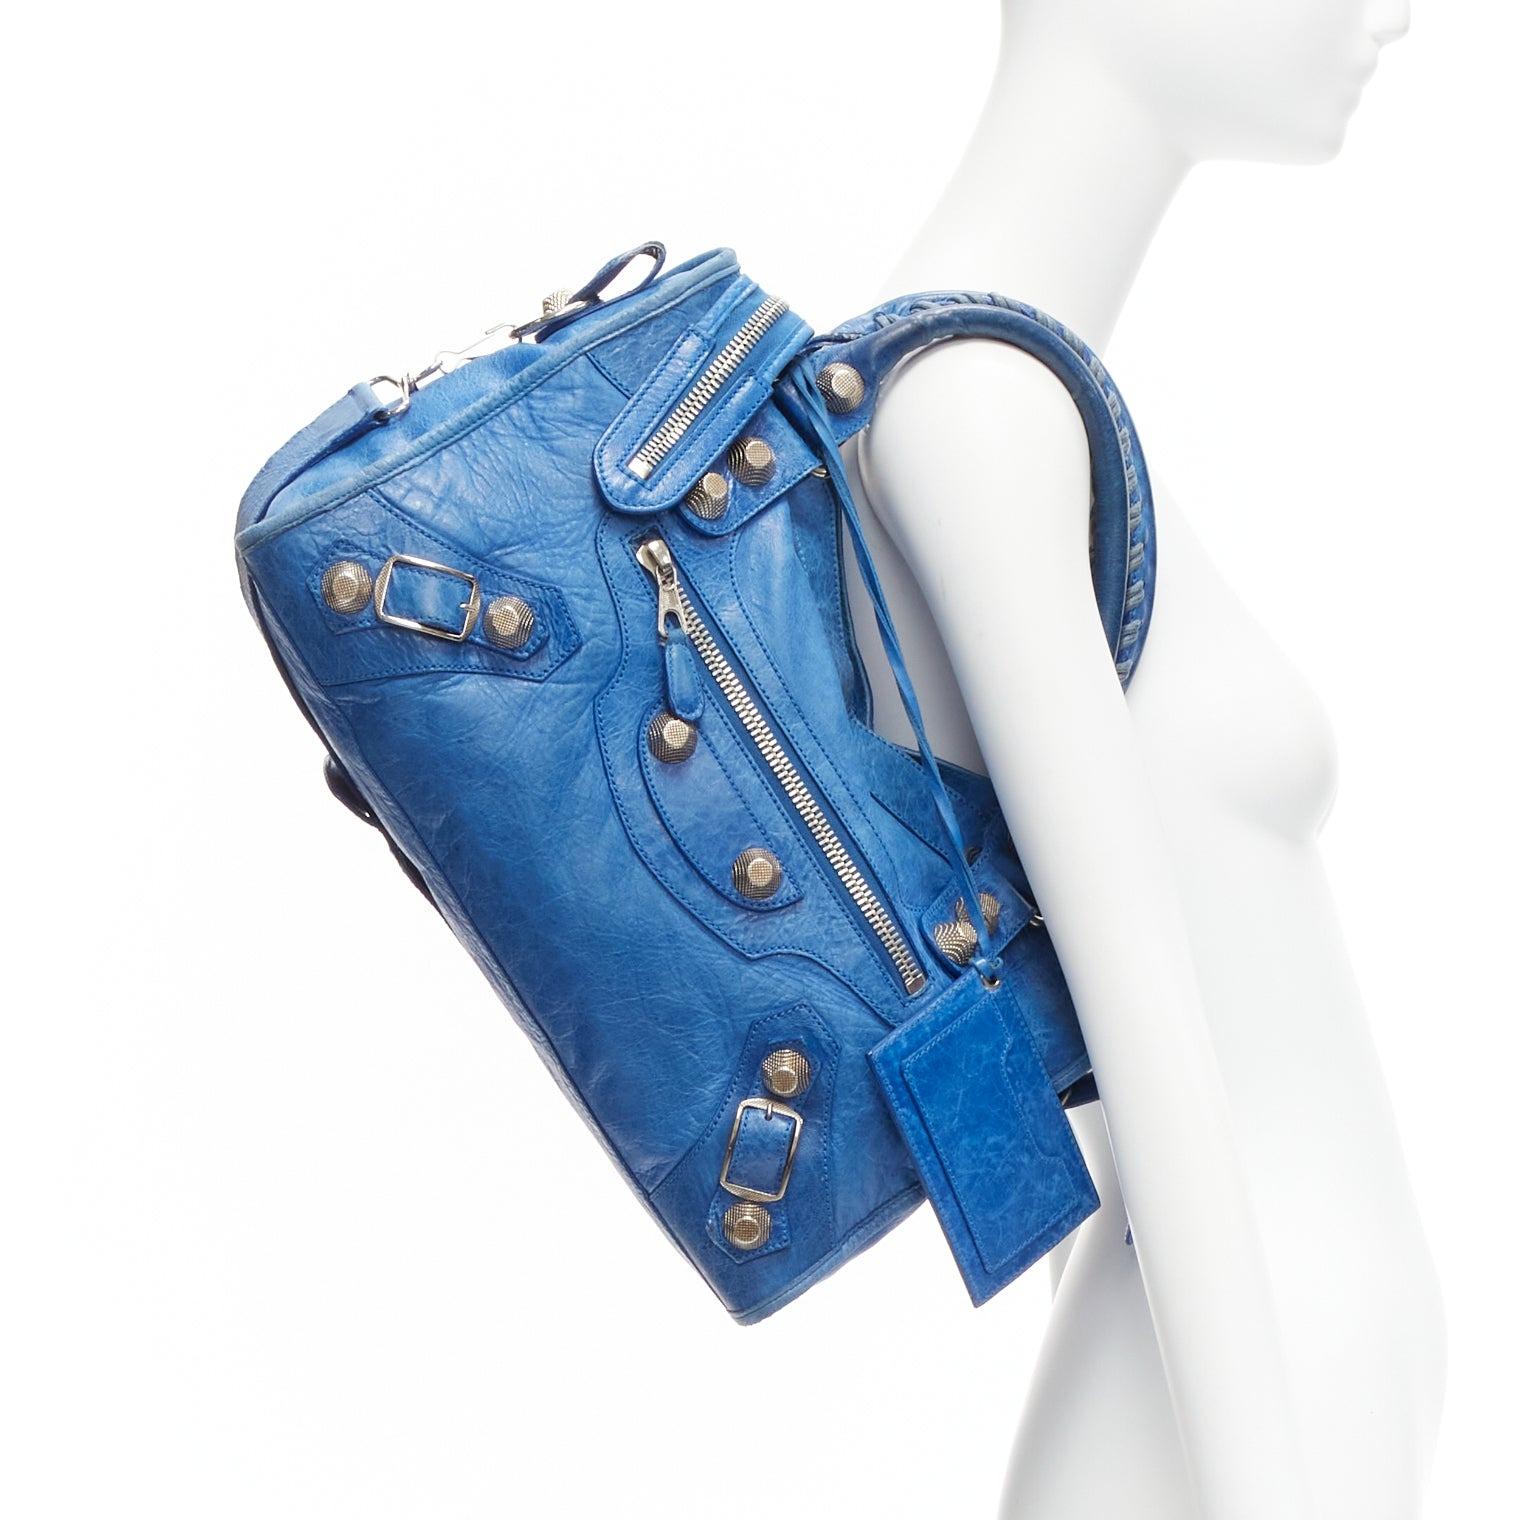 BALENCIAGA Giant 21 City blue leather SHW motorcycle tote bag
Reference: CELE/A00019
Brand: Balenciaga
Model: Giant 21 Moto City
Material: Leather, Metal
Color: Blue
Pattern: Solid
Closure: Zip
Lining: Black Fabric
Extra Details: This chic tote is